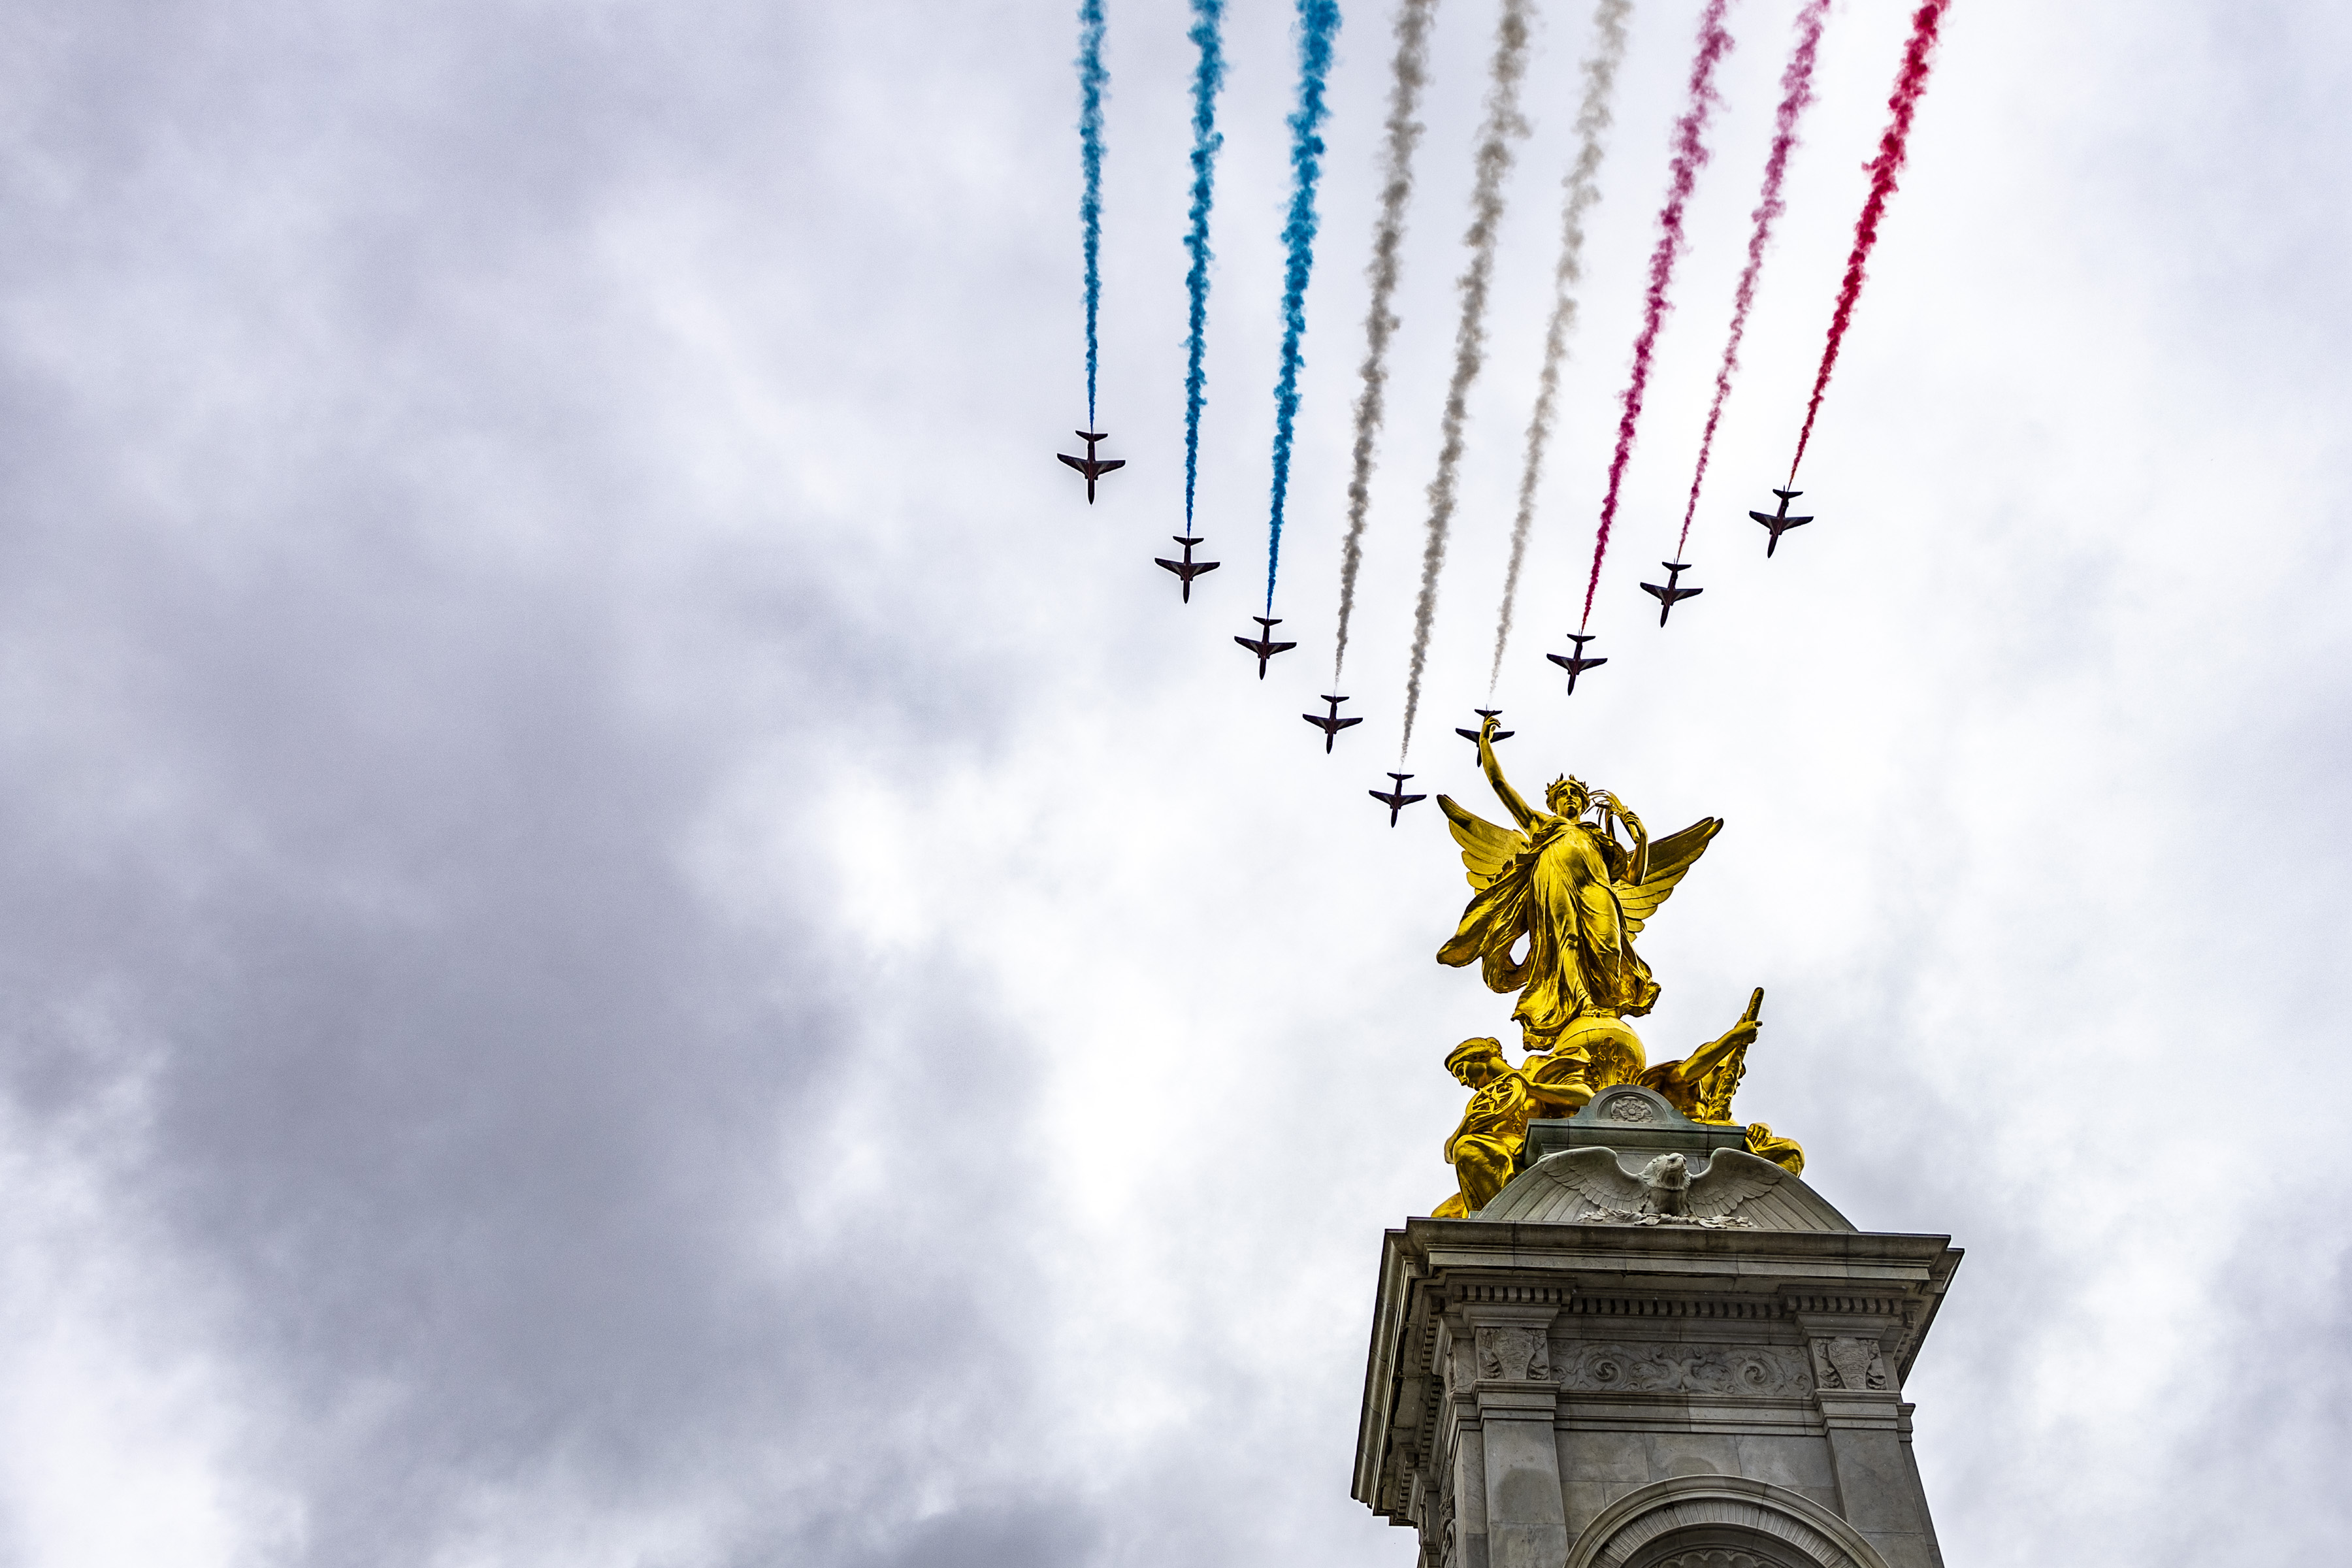 Flying over London for a big, state occasion was a highlight for all three pilots.